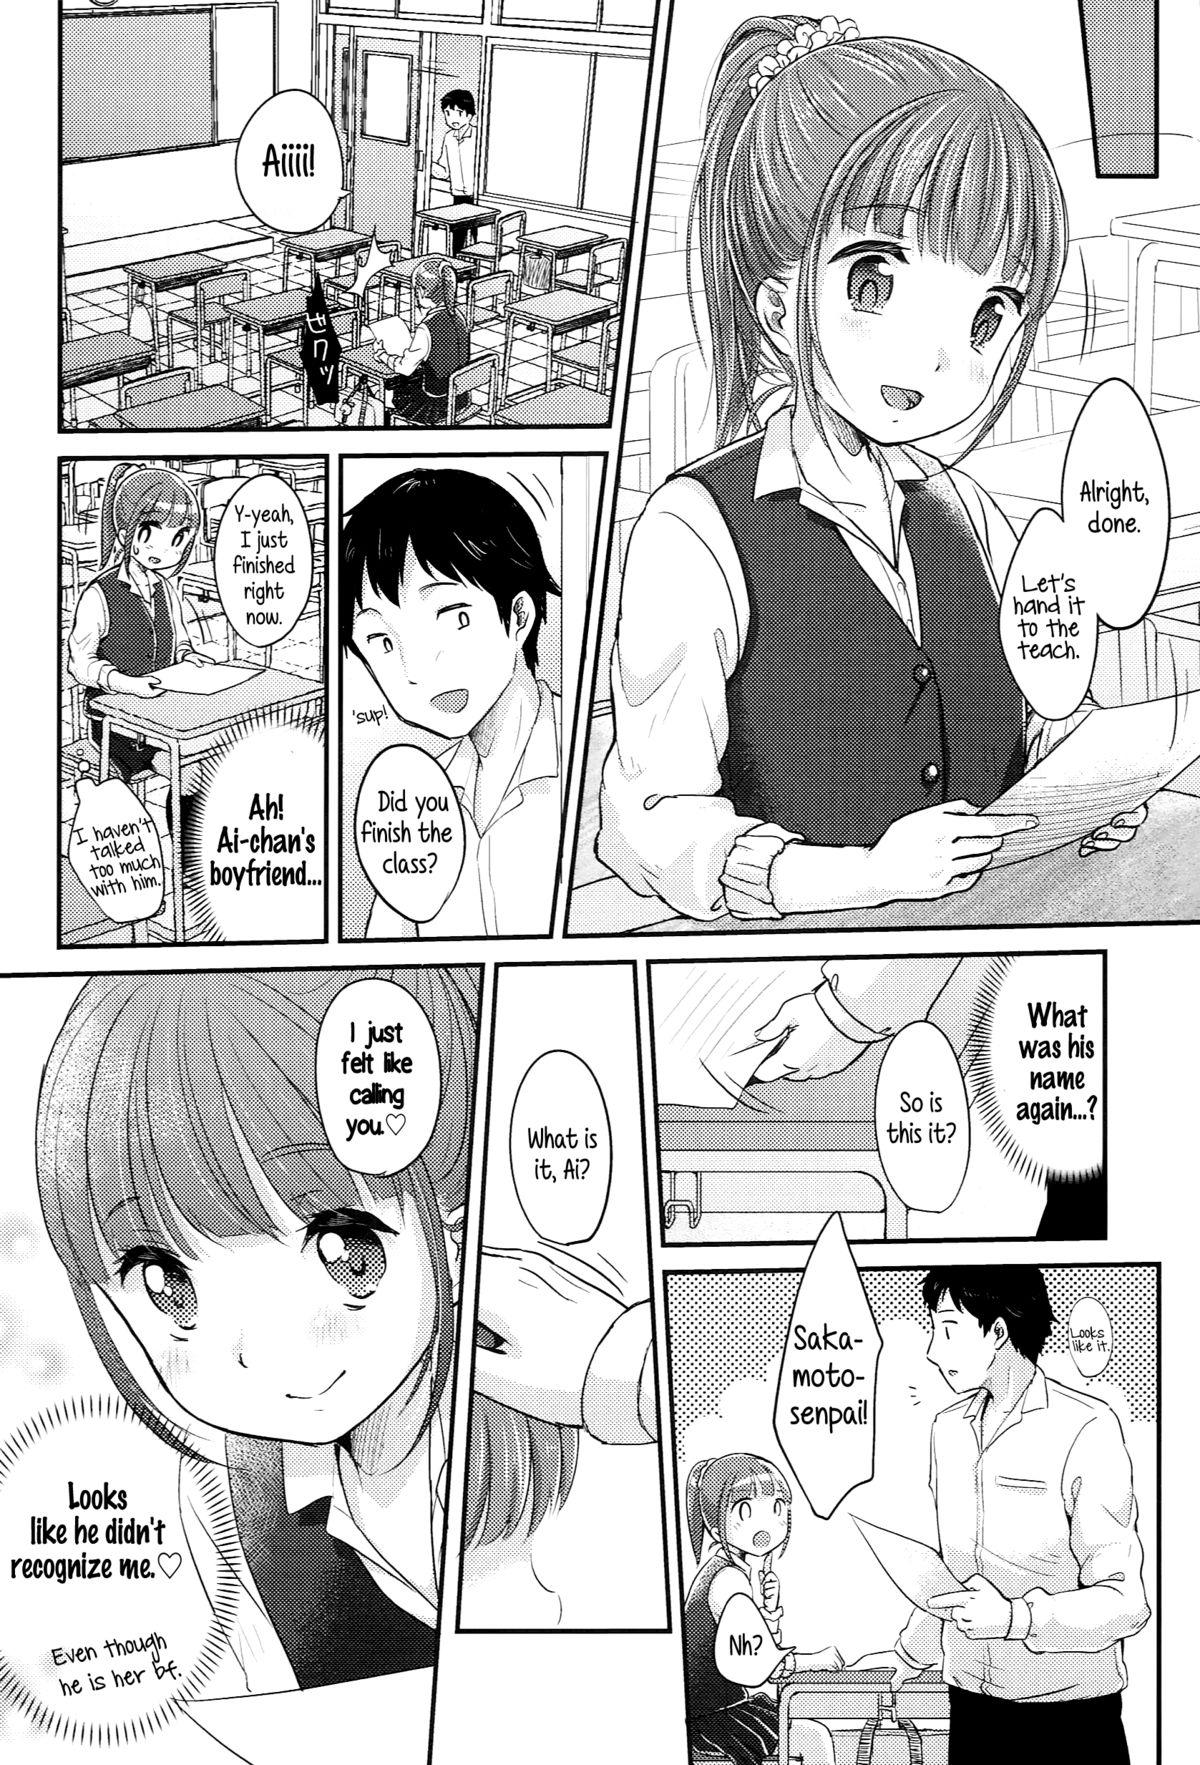 Saikyou Futago Party ♥ | The strongest Twin Party ♥ Ch. 1-2 5